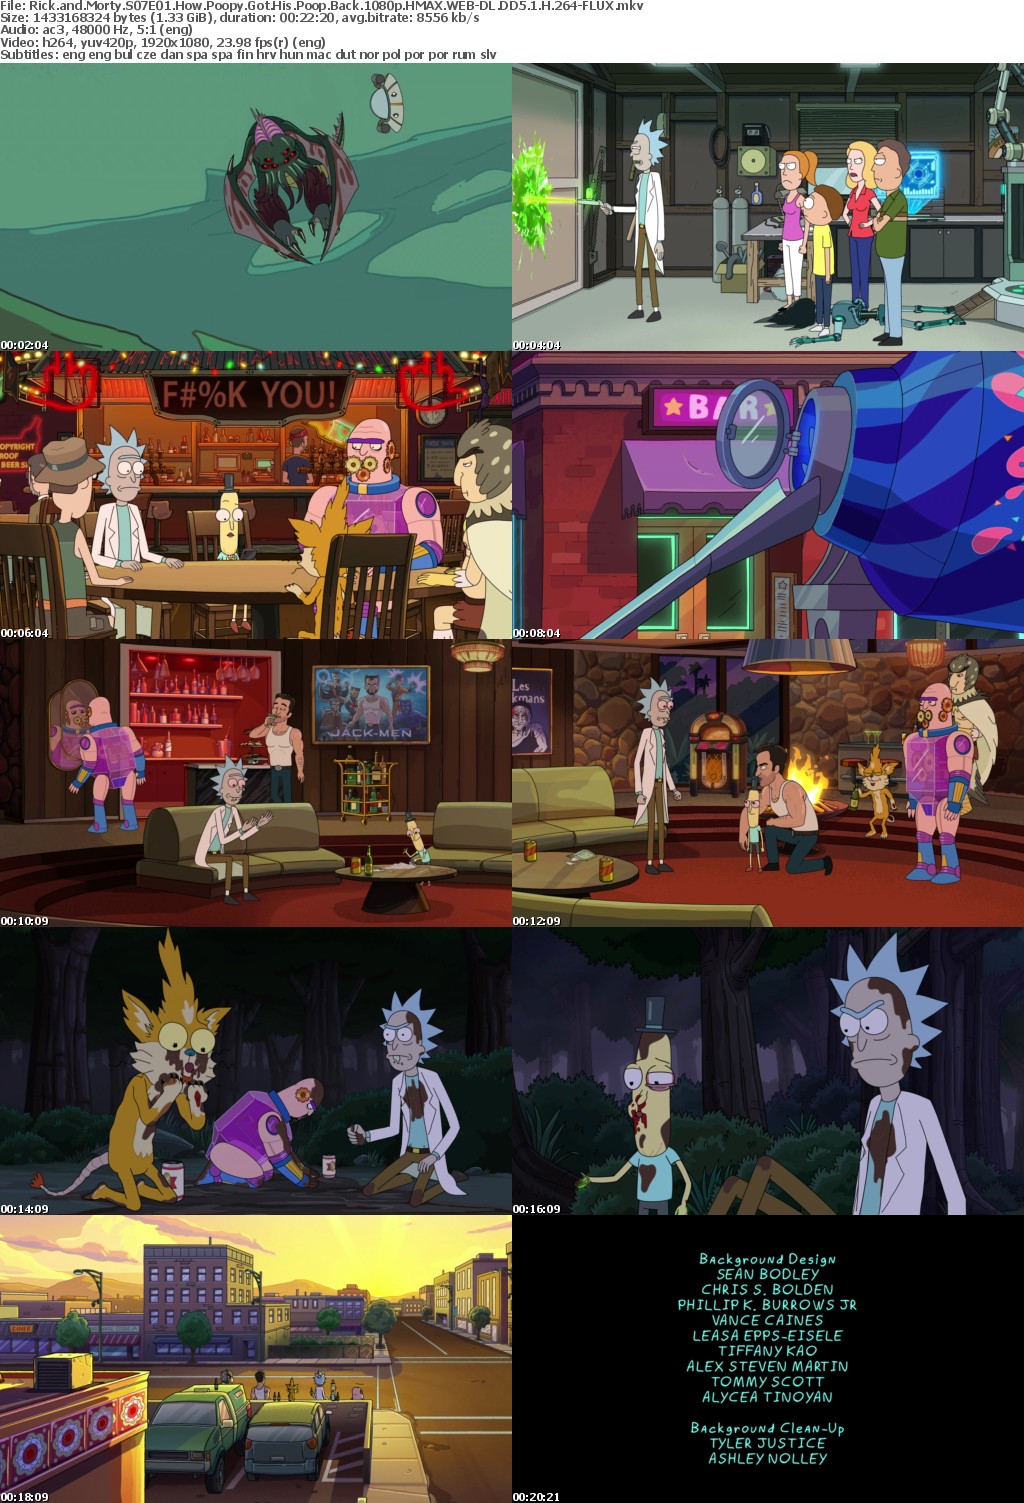 Rick and Morty S07E01 How Poopy Got His Poop Back 1080p HMAX WEB-DL DD5 1 H 264-FLUX